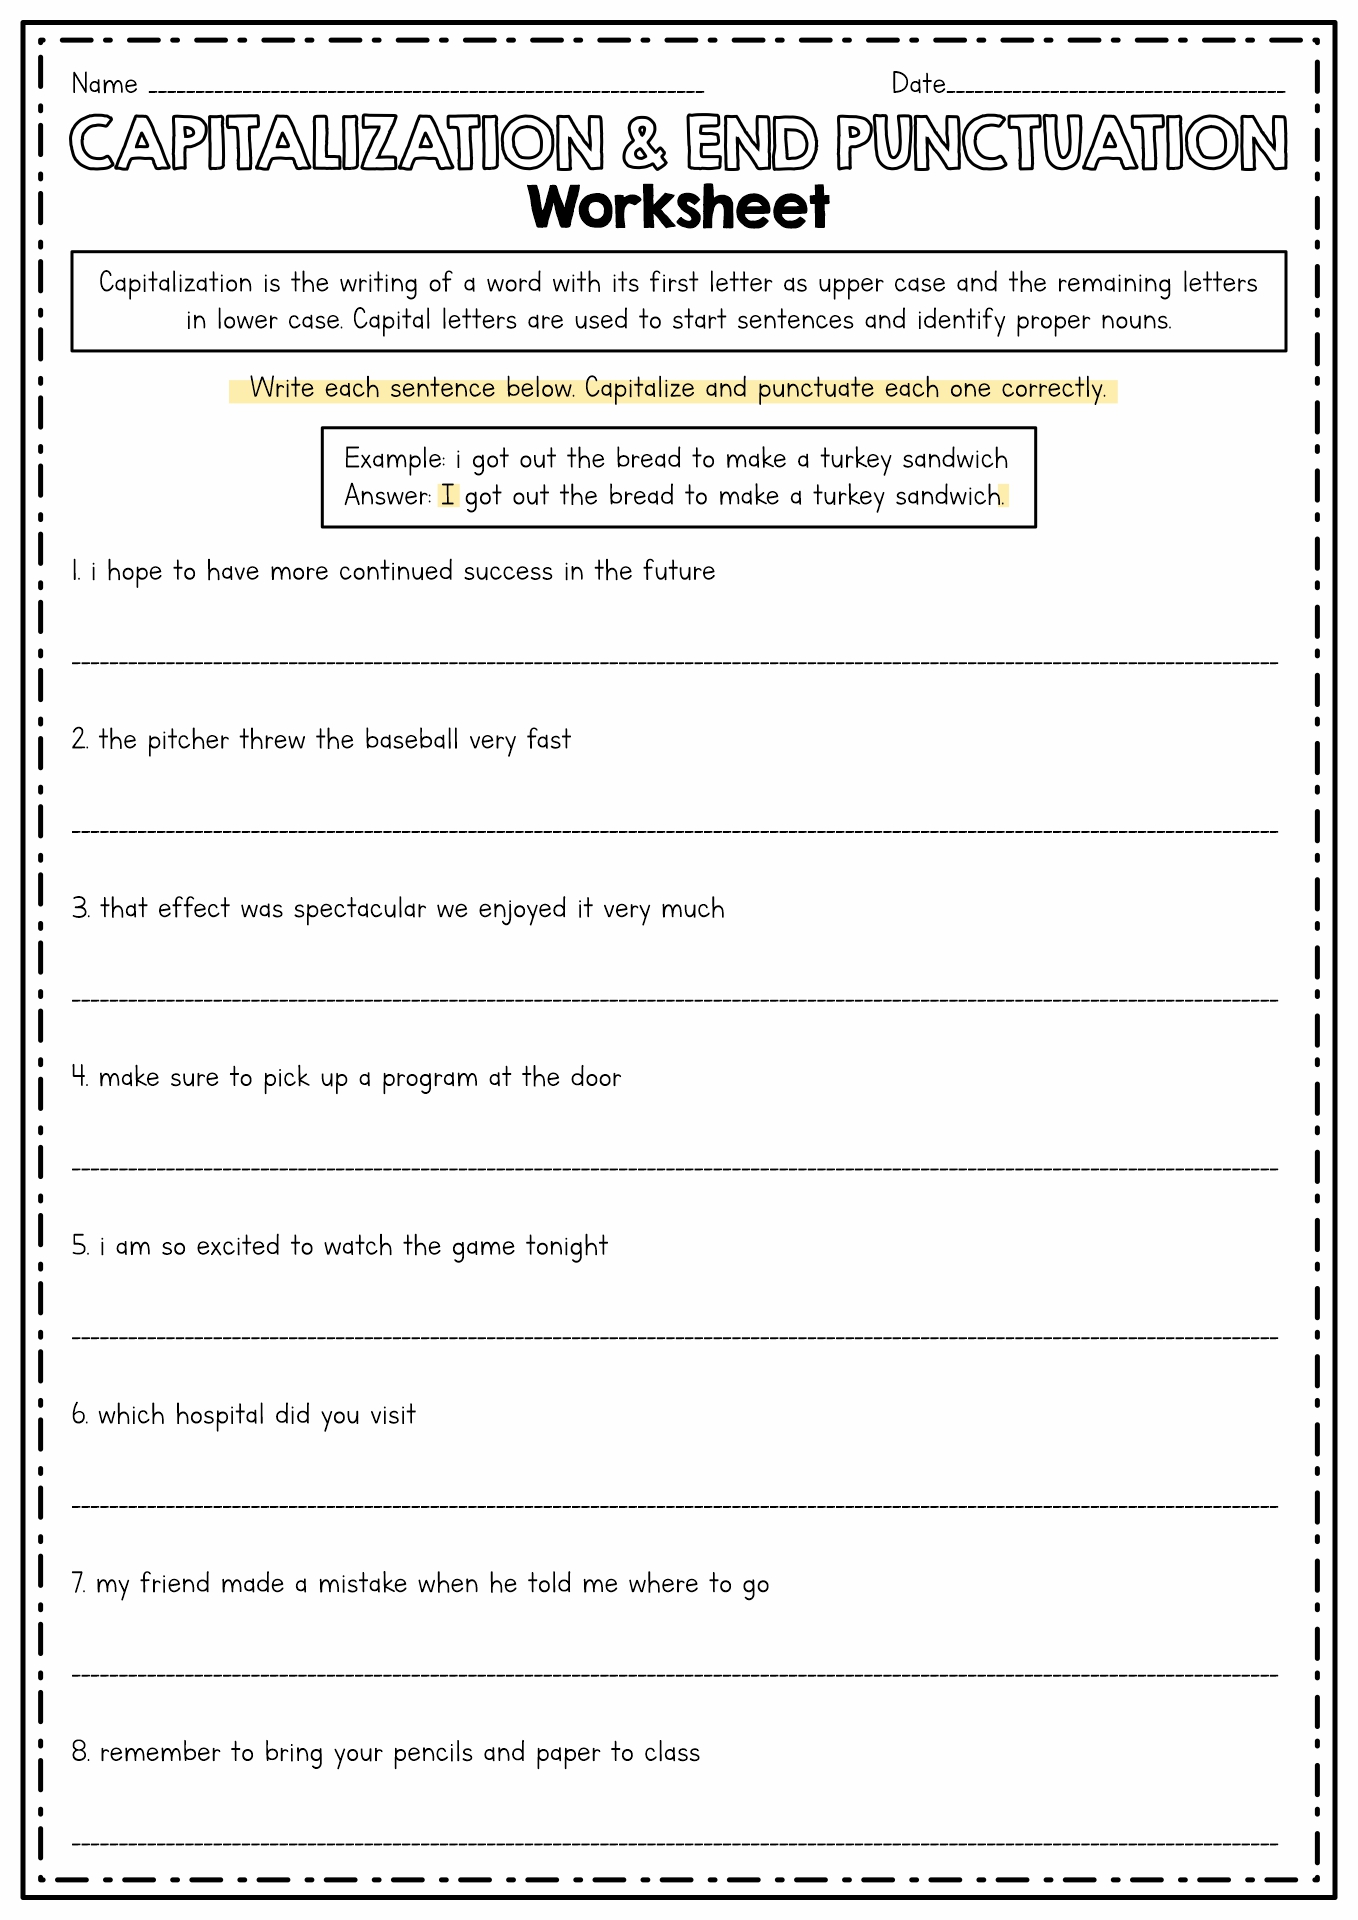 End Punctuation and Capitalization Worksheet